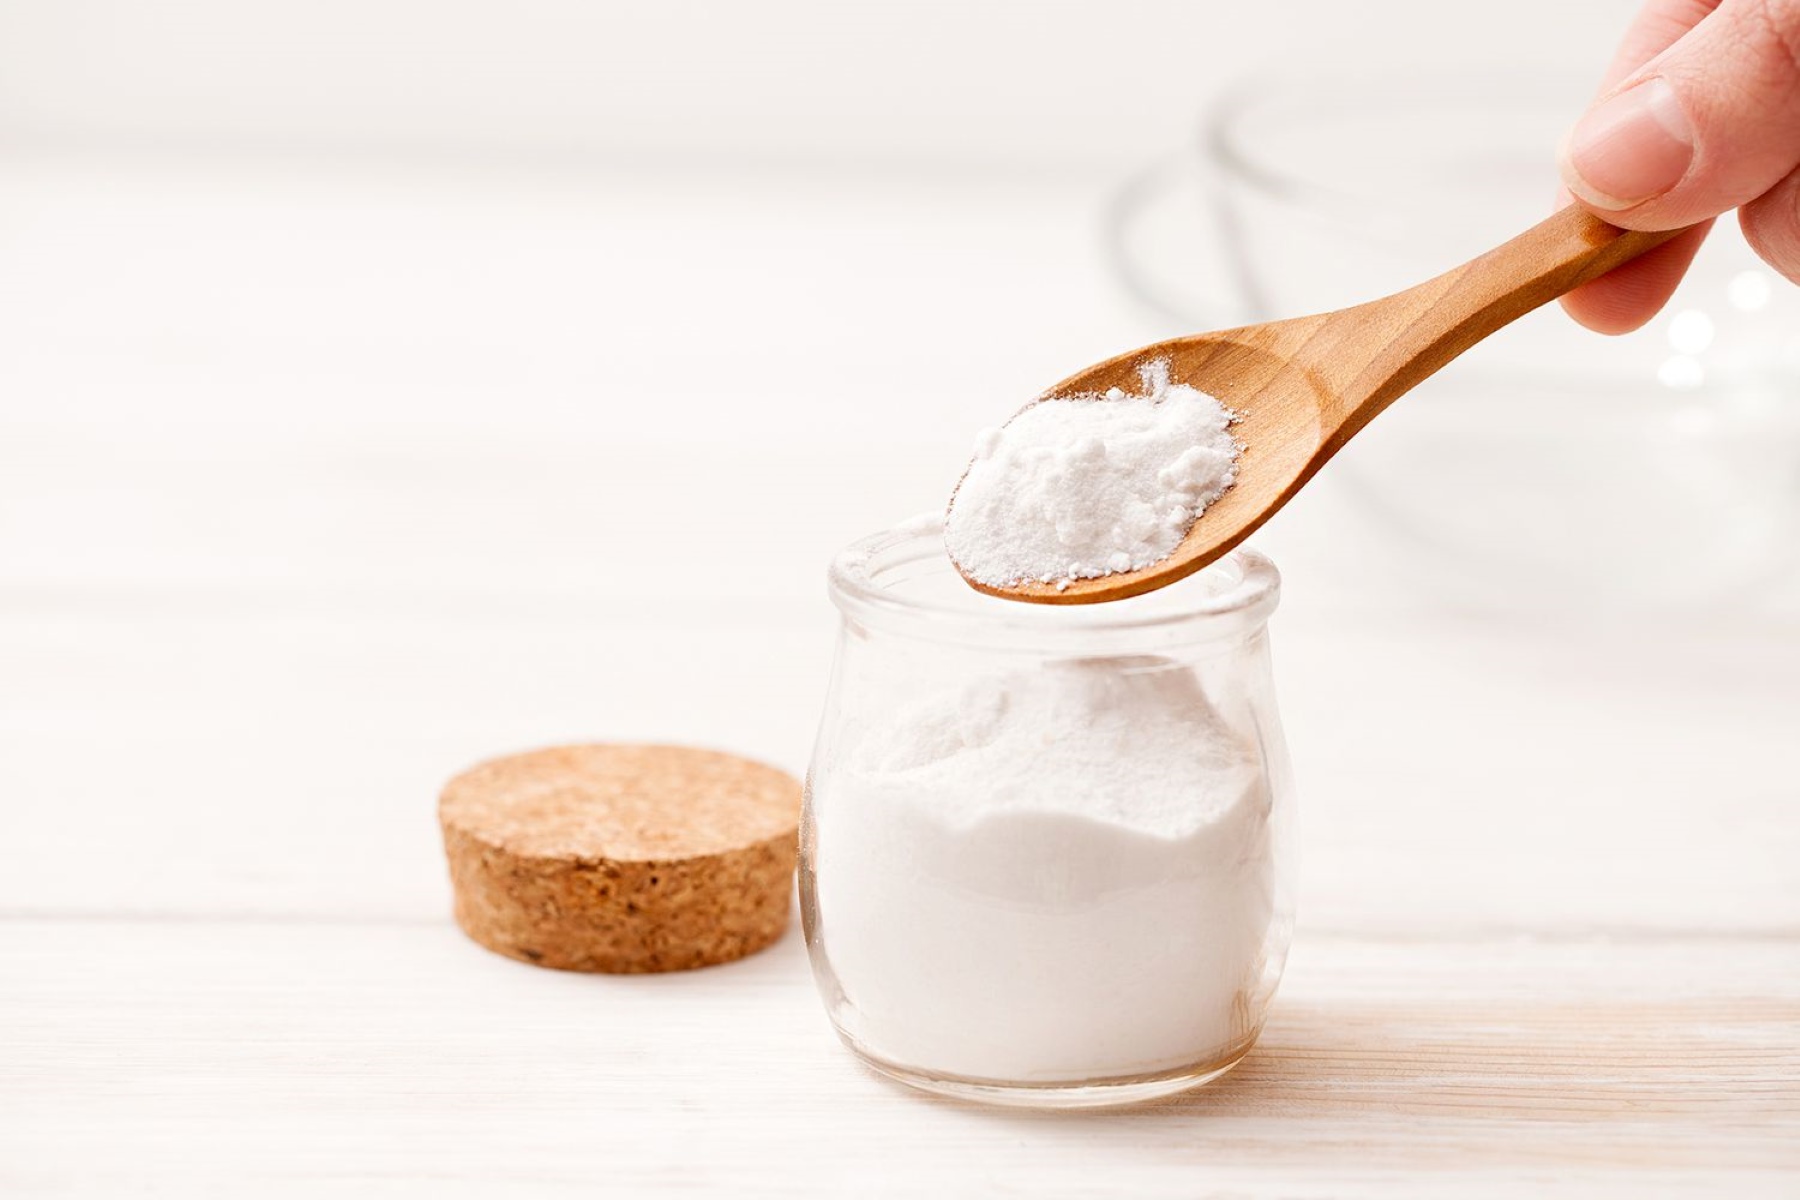 How To Use Baking Soda As A Deodorizer